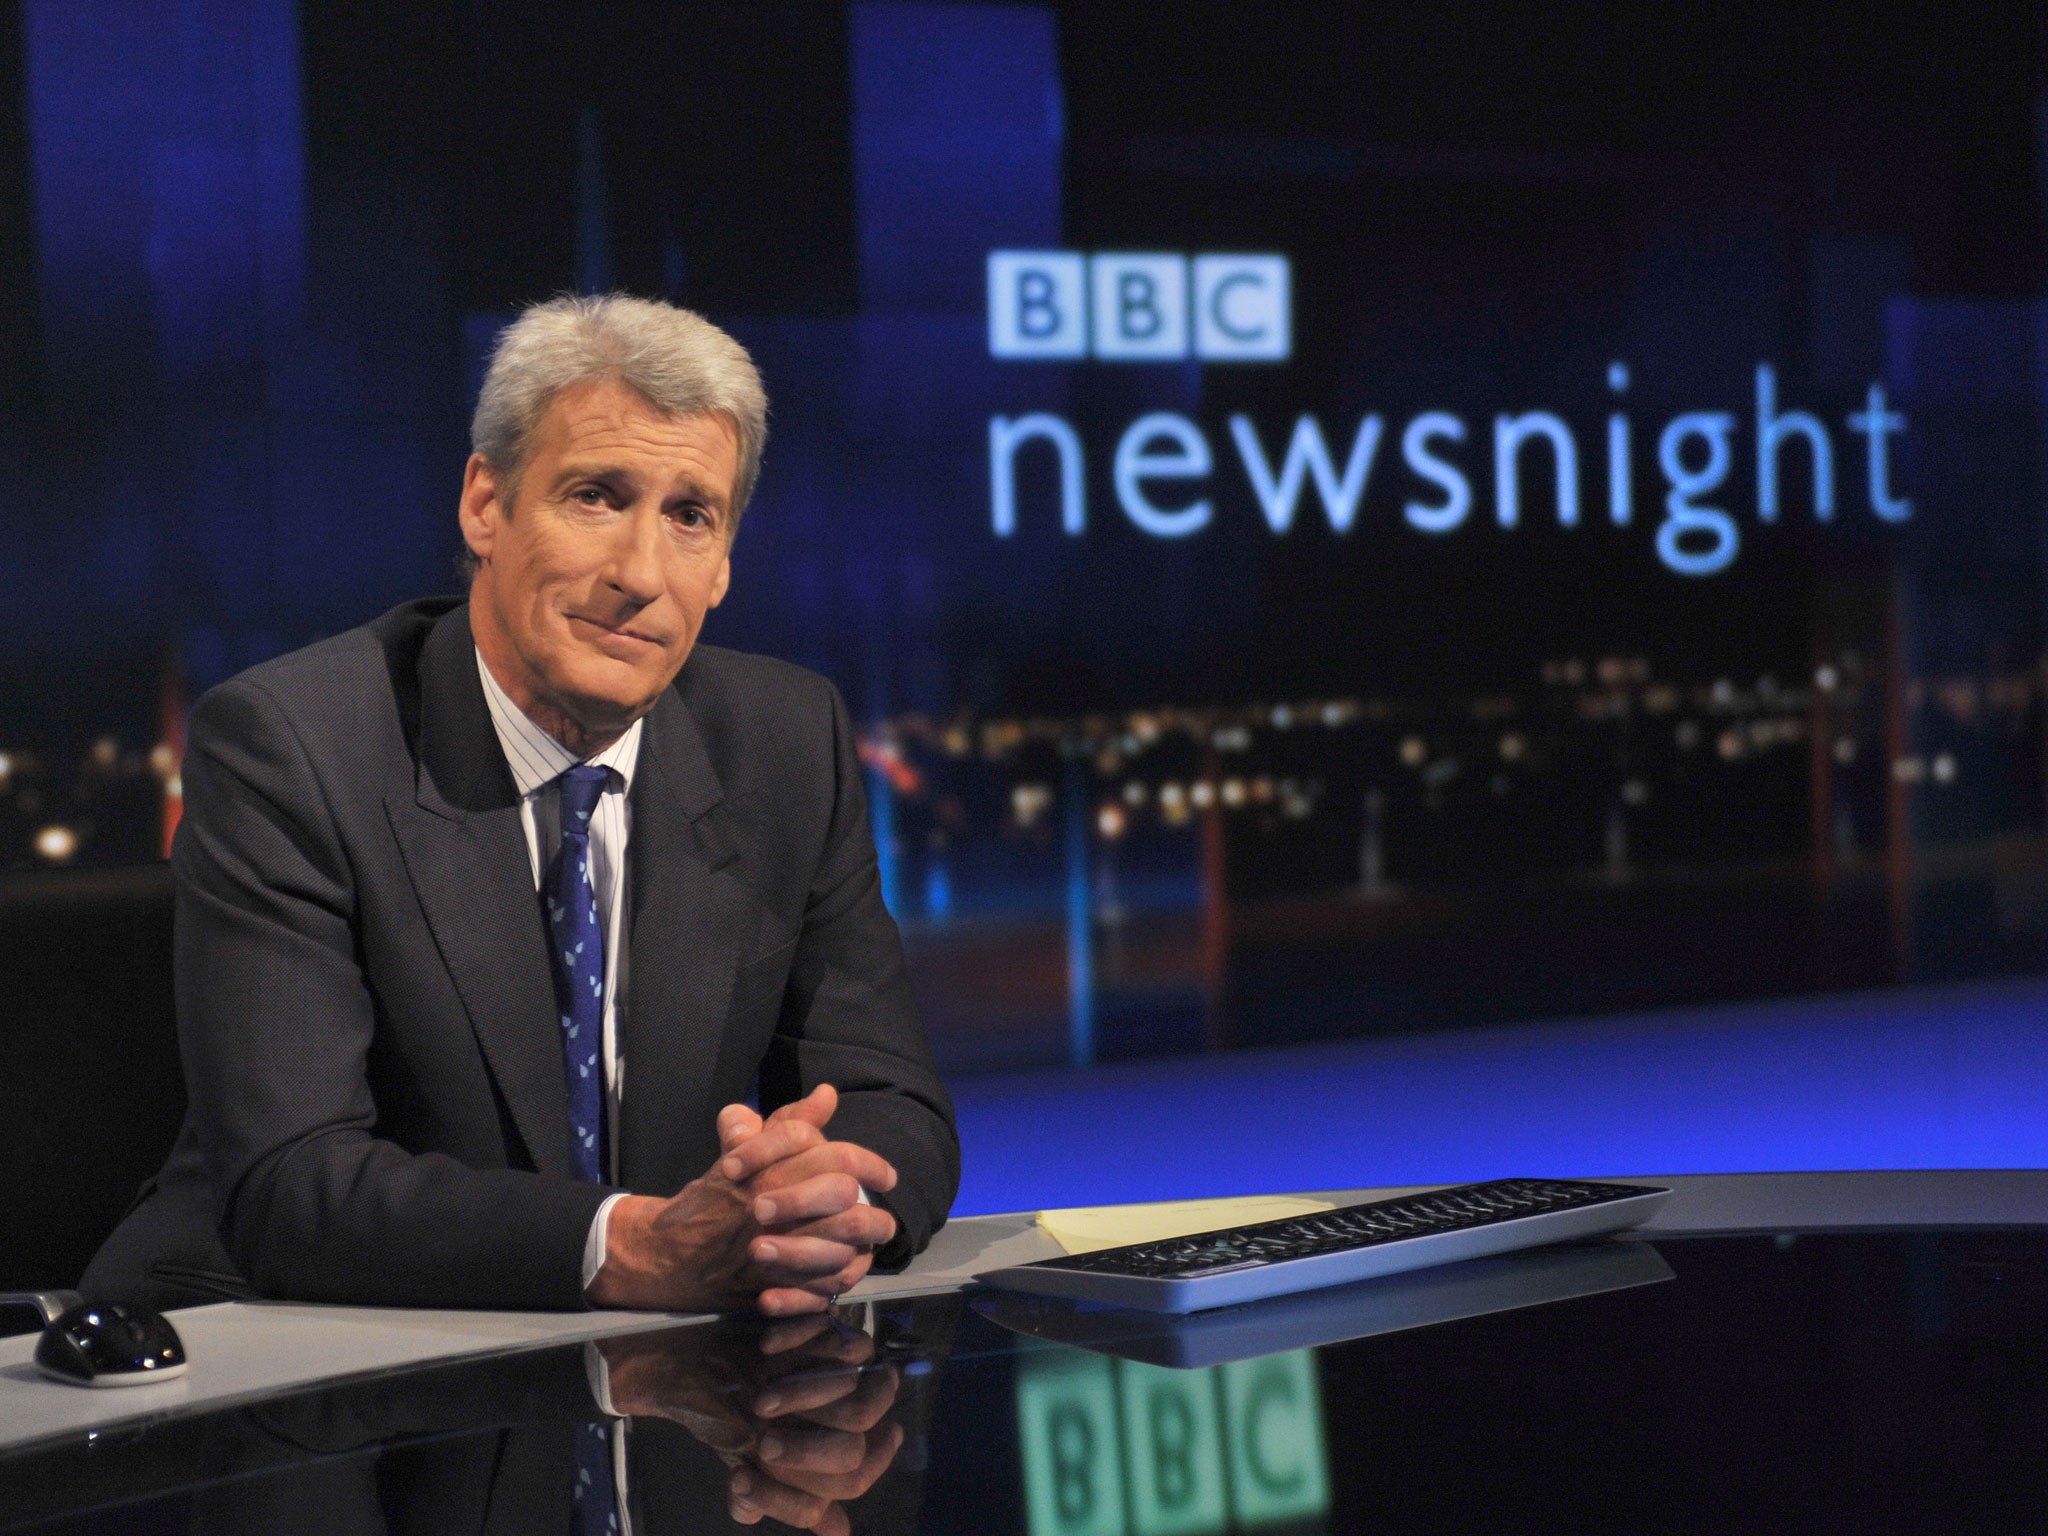 Newsnight is turning to YouTube to find a new global audience